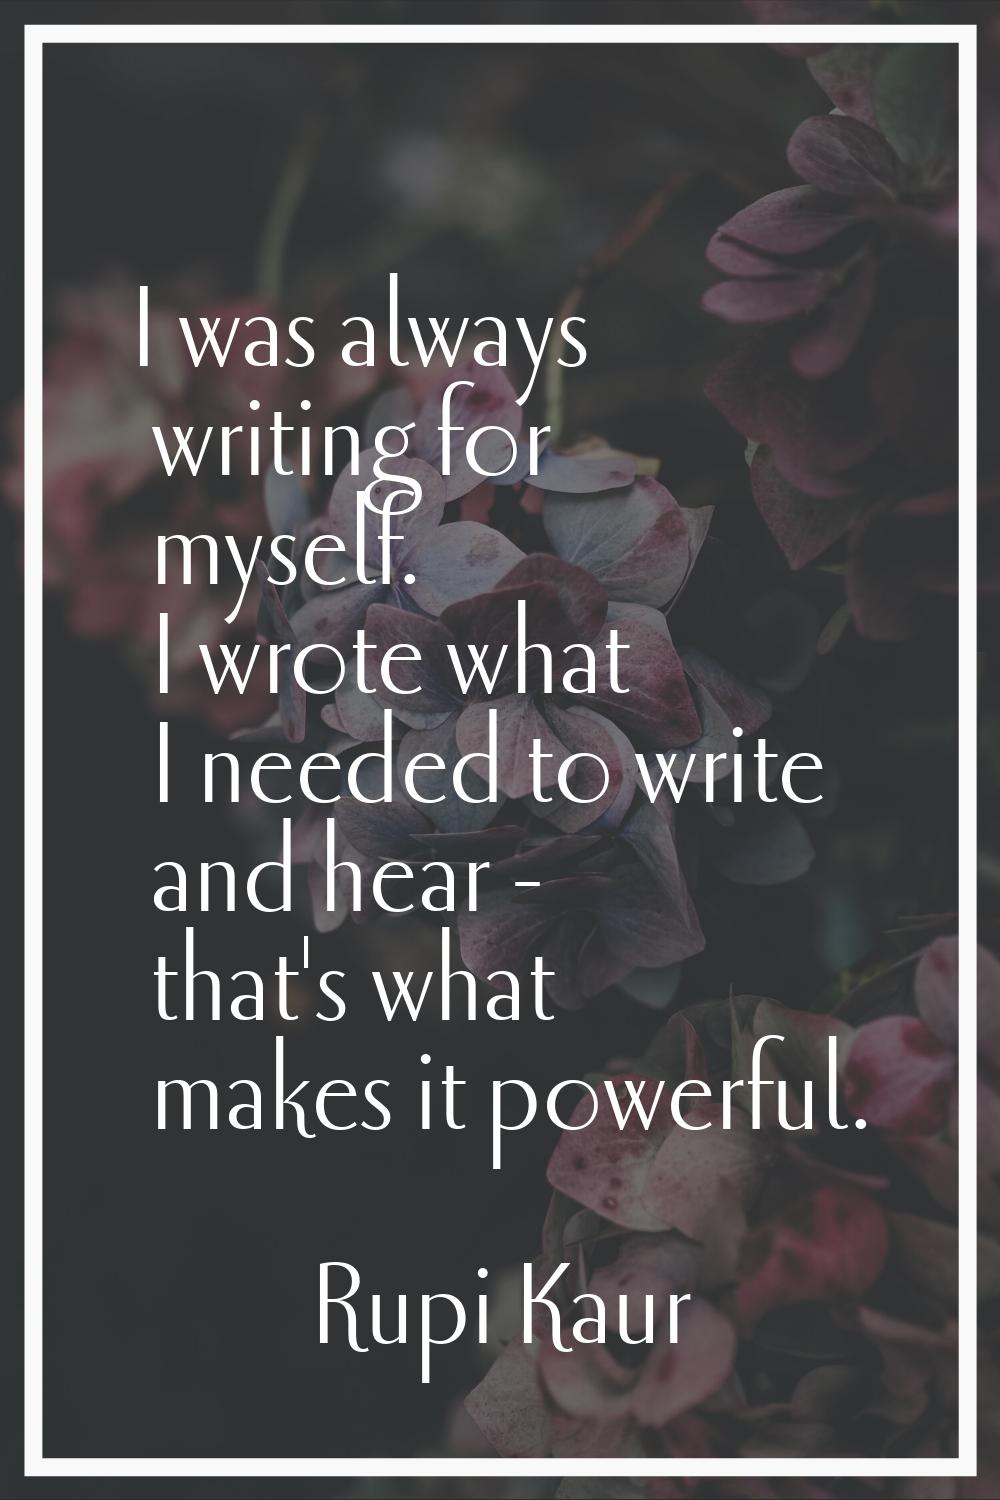 I was always writing for myself. I wrote what I needed to write and hear - that's what makes it pow